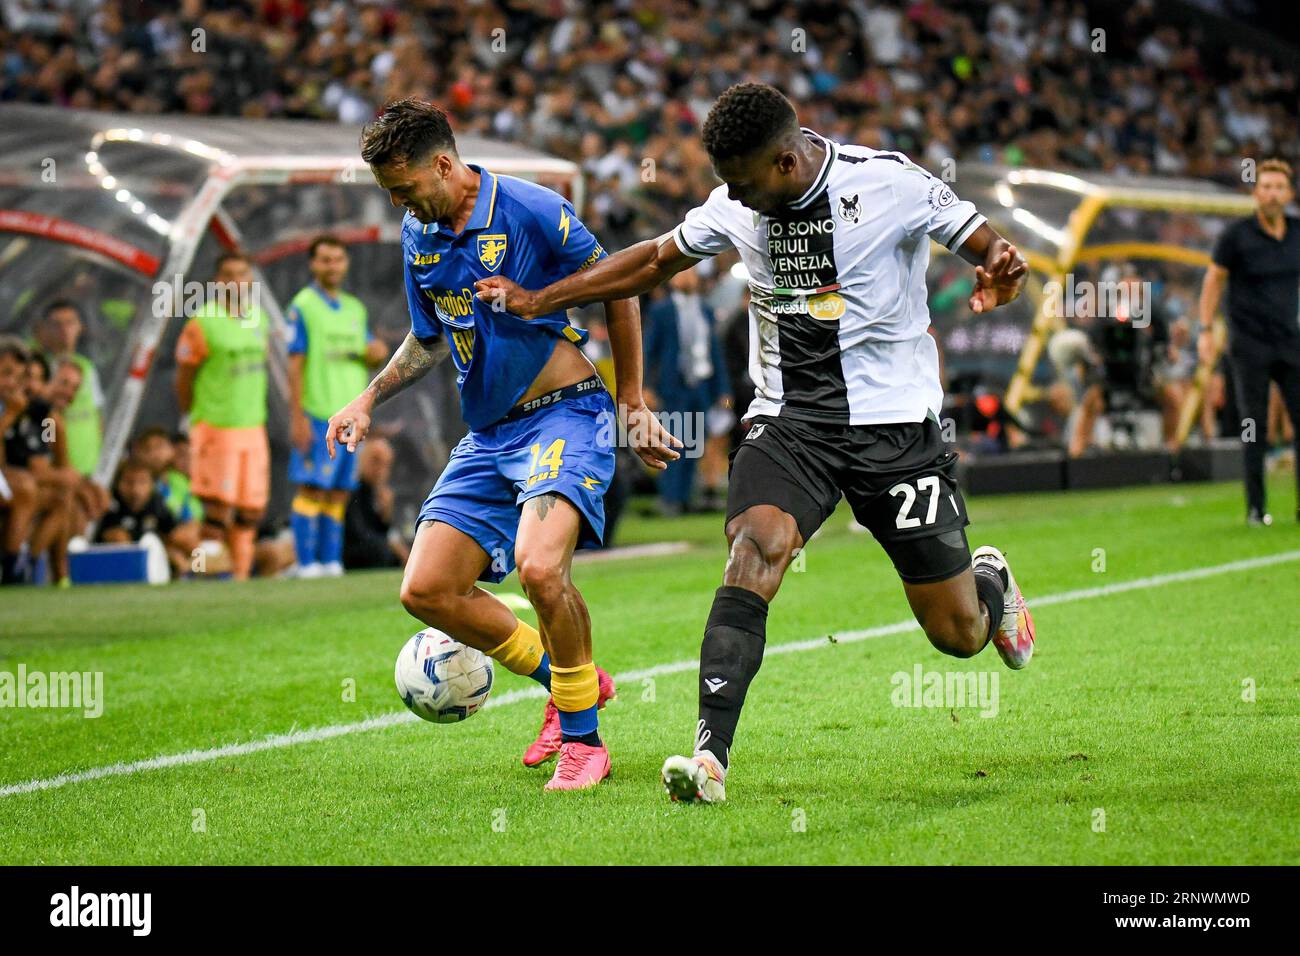 Udine, Italy. 02nd Sep, 2023. Frosinone's Francesco Gelli in action against Udinese's Christian Kabasele during Udinese Calcio vs Frosinone Calcio, Italian soccer Serie A match in Udine, Italy, September 02 2023 Credit: Independent Photo Agency/Alamy Live News Stock Photo